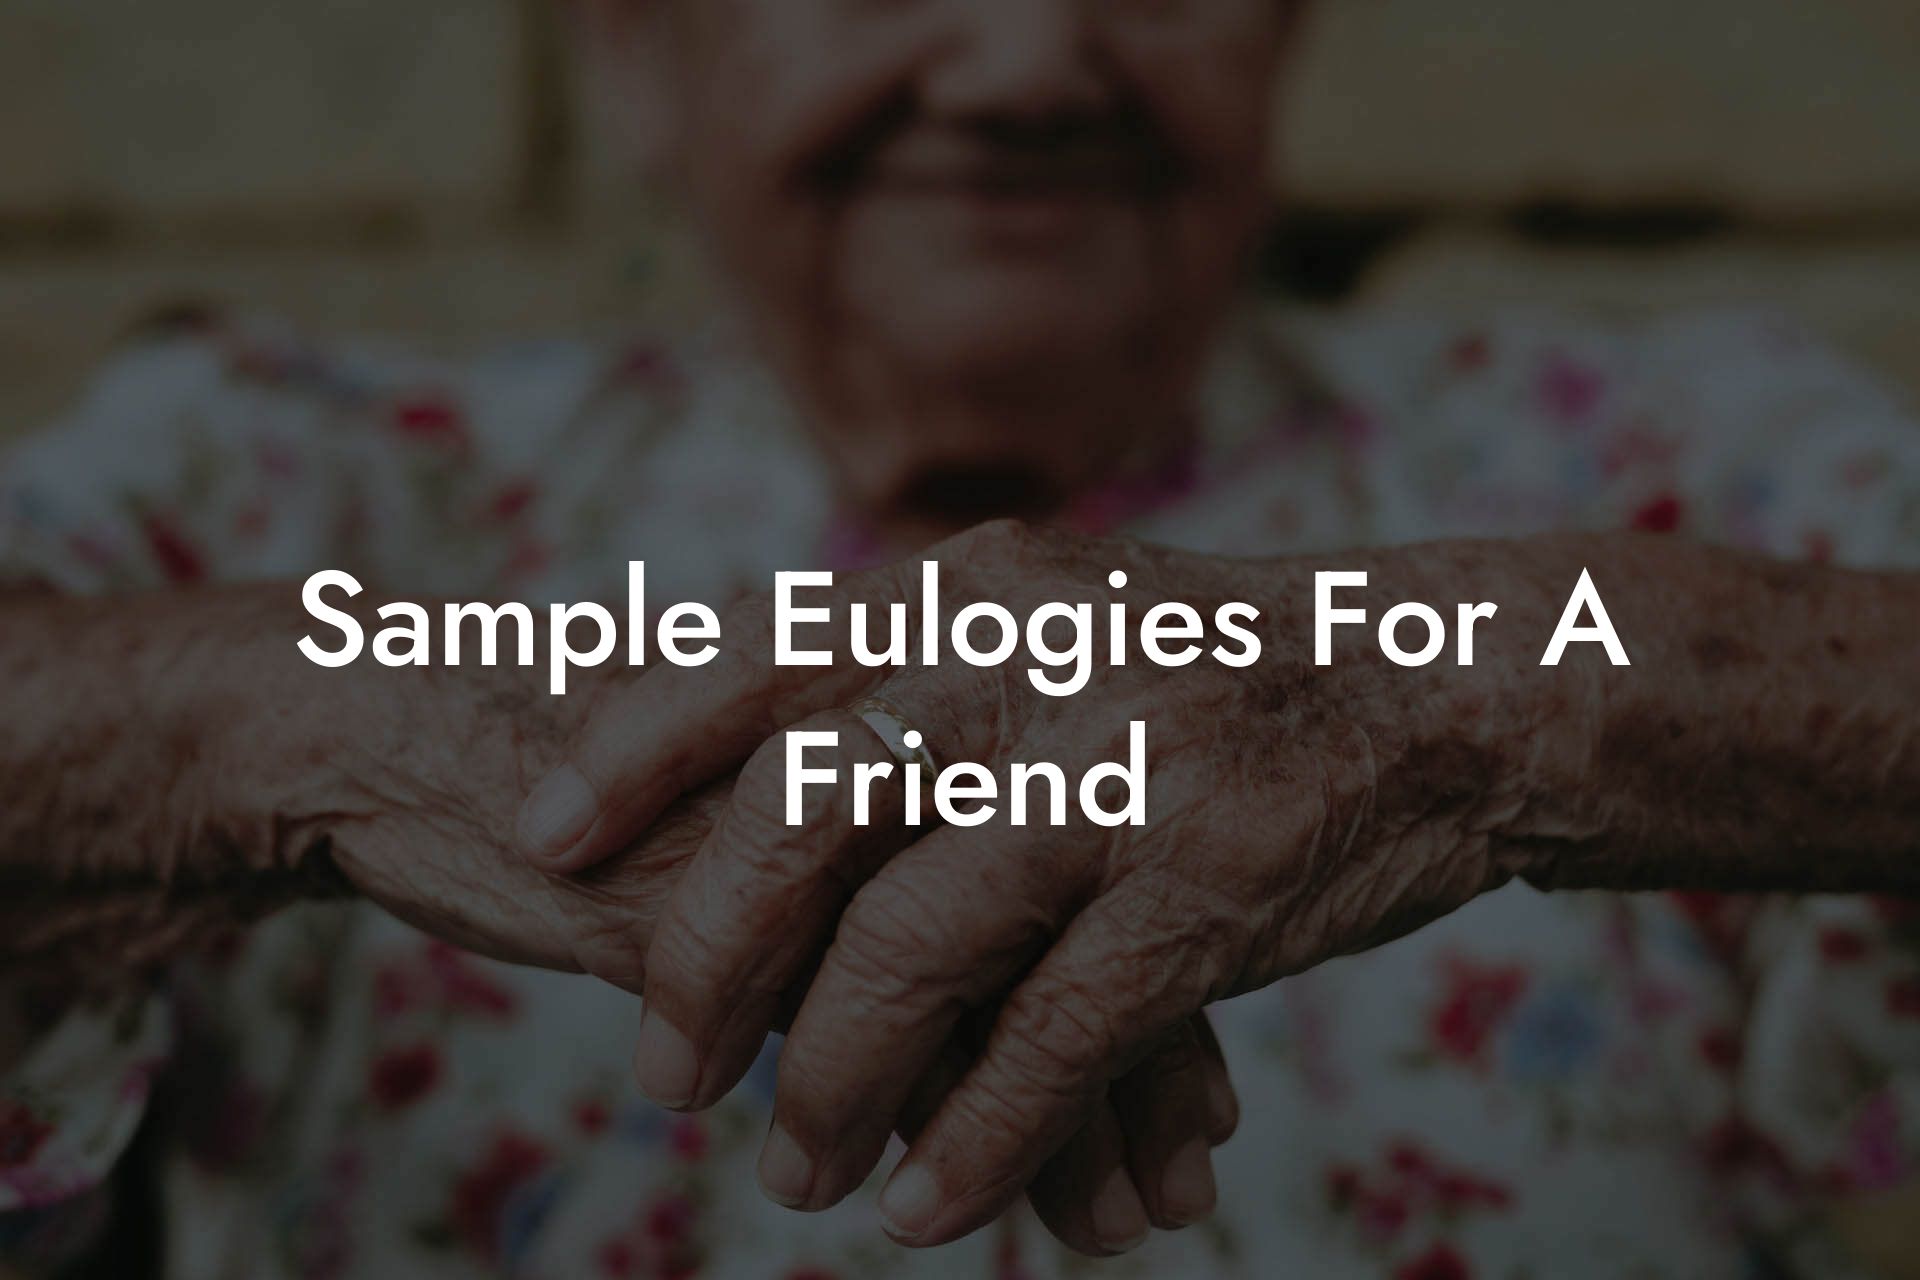 Sample Eulogies For A Friend